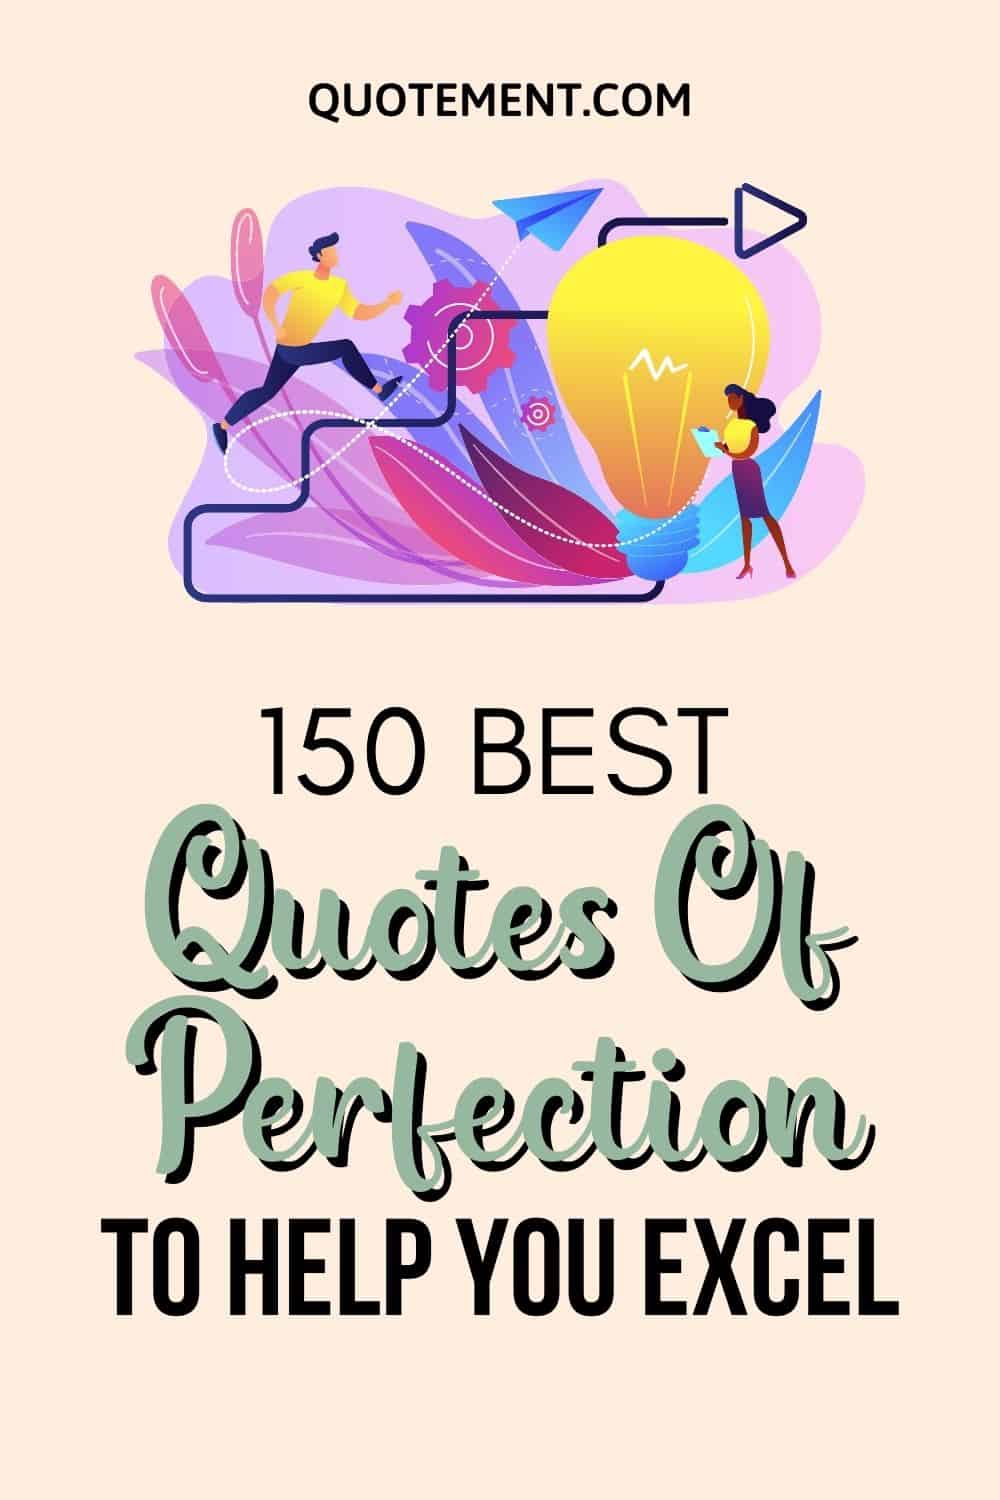 150 Wise Quotes Of Perfection To Propel You To Excellence